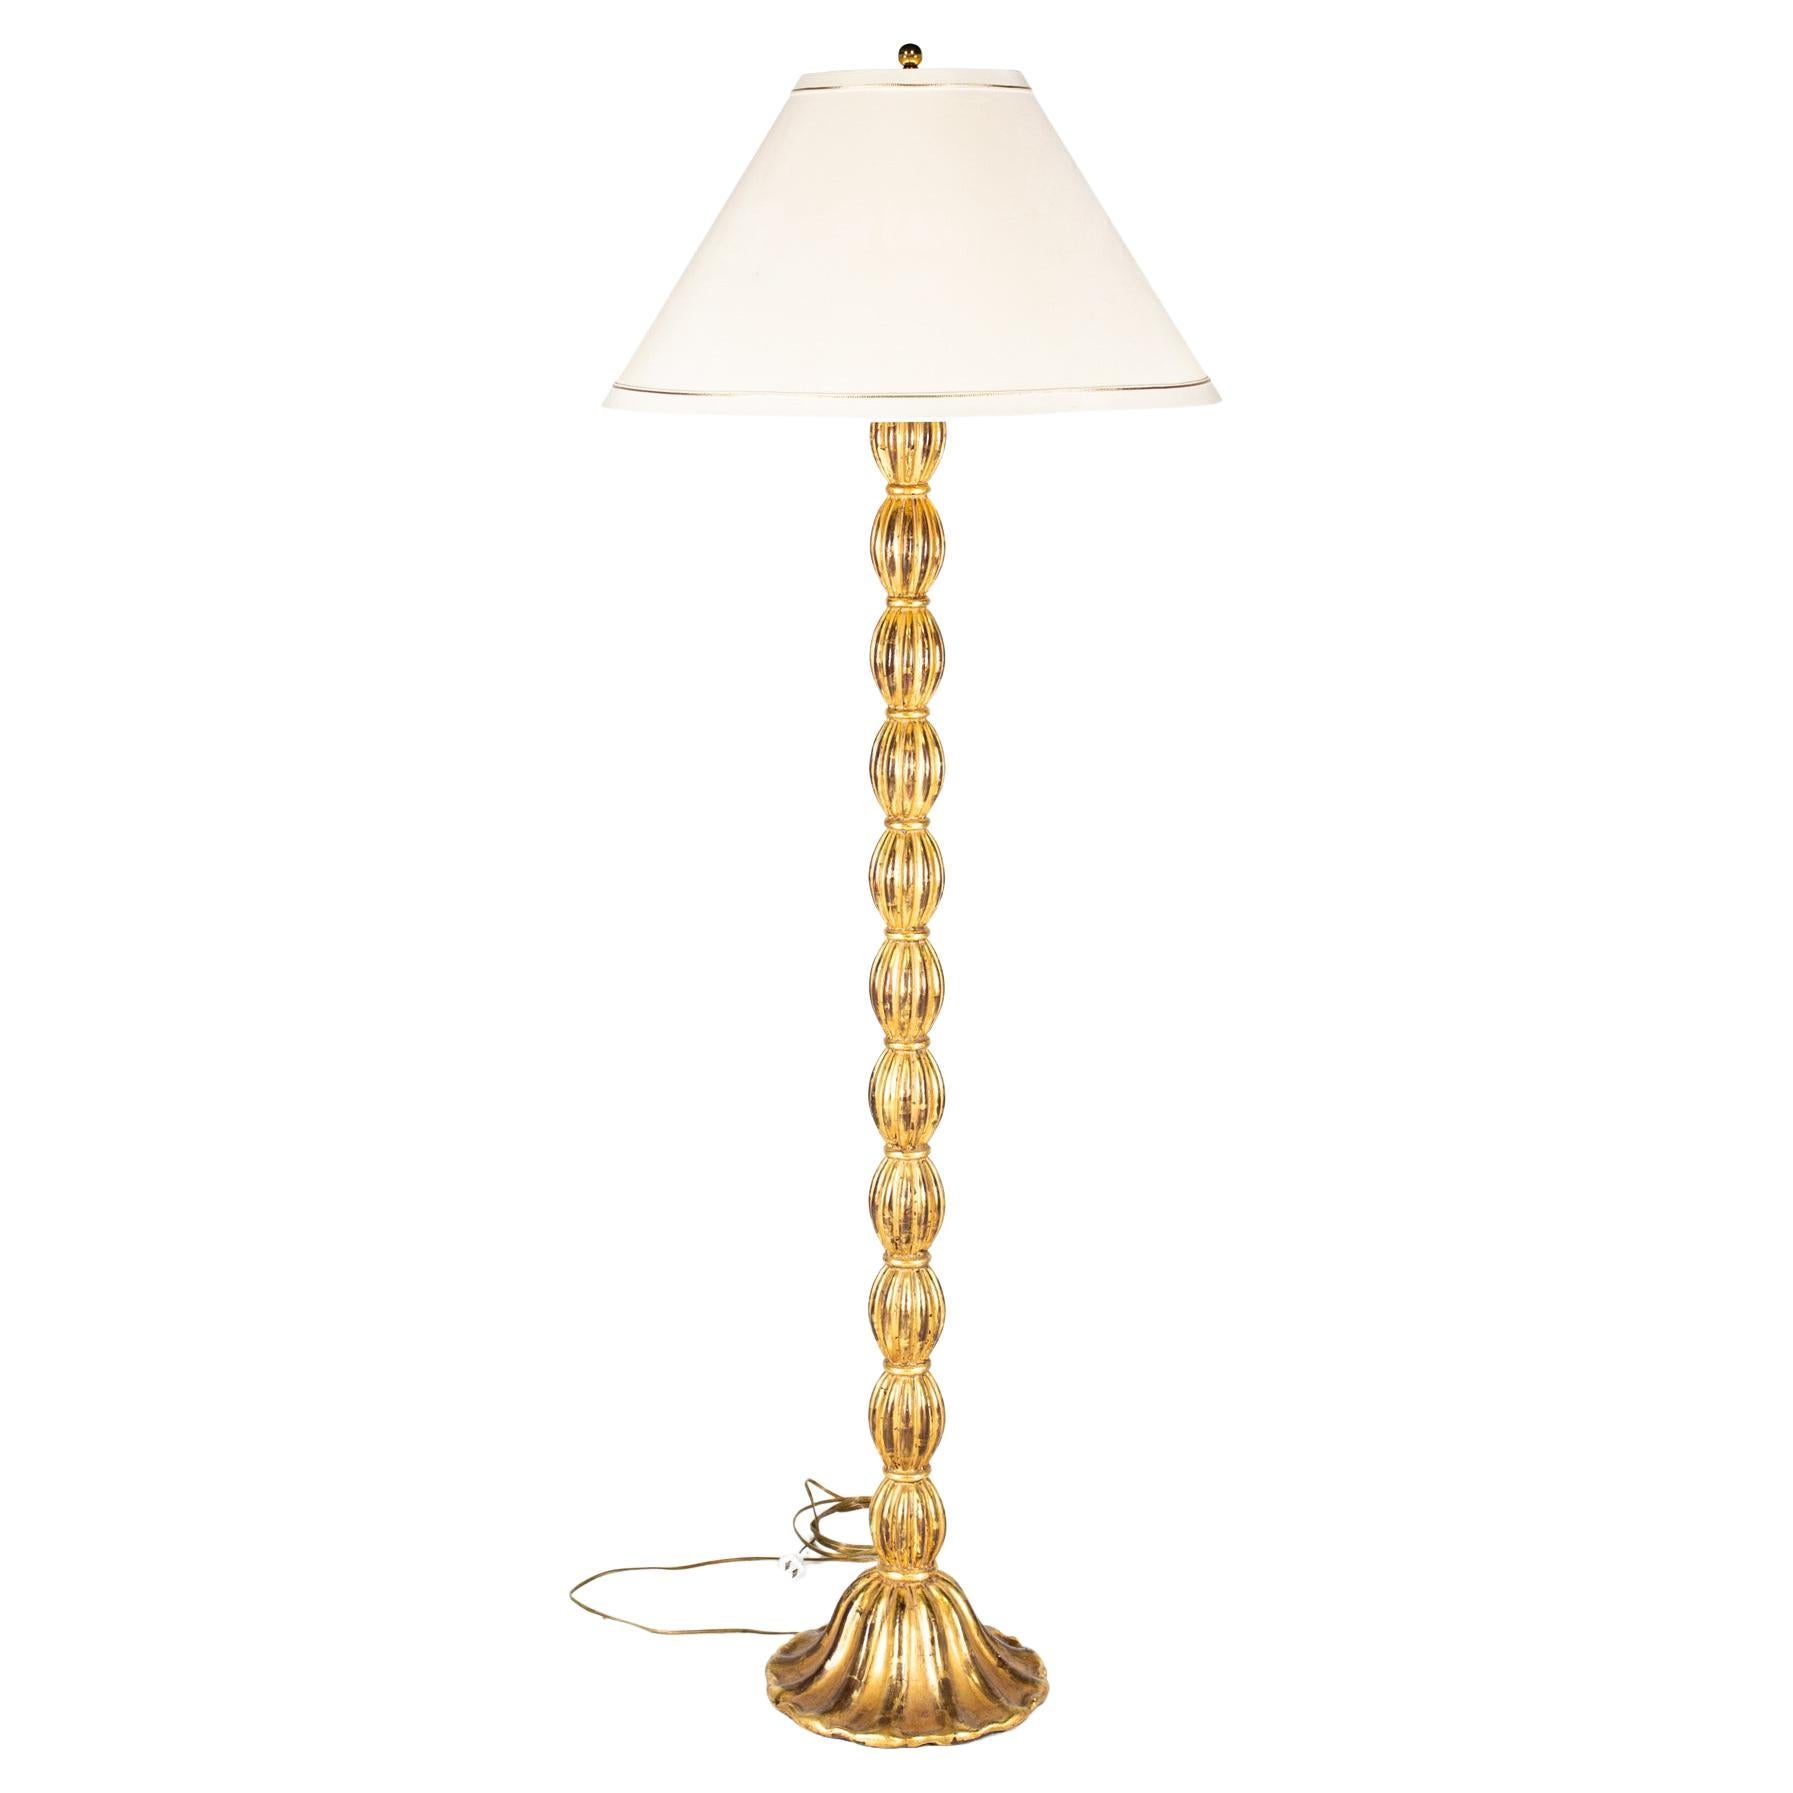 Antiqued Gold Painted Floor Lamp